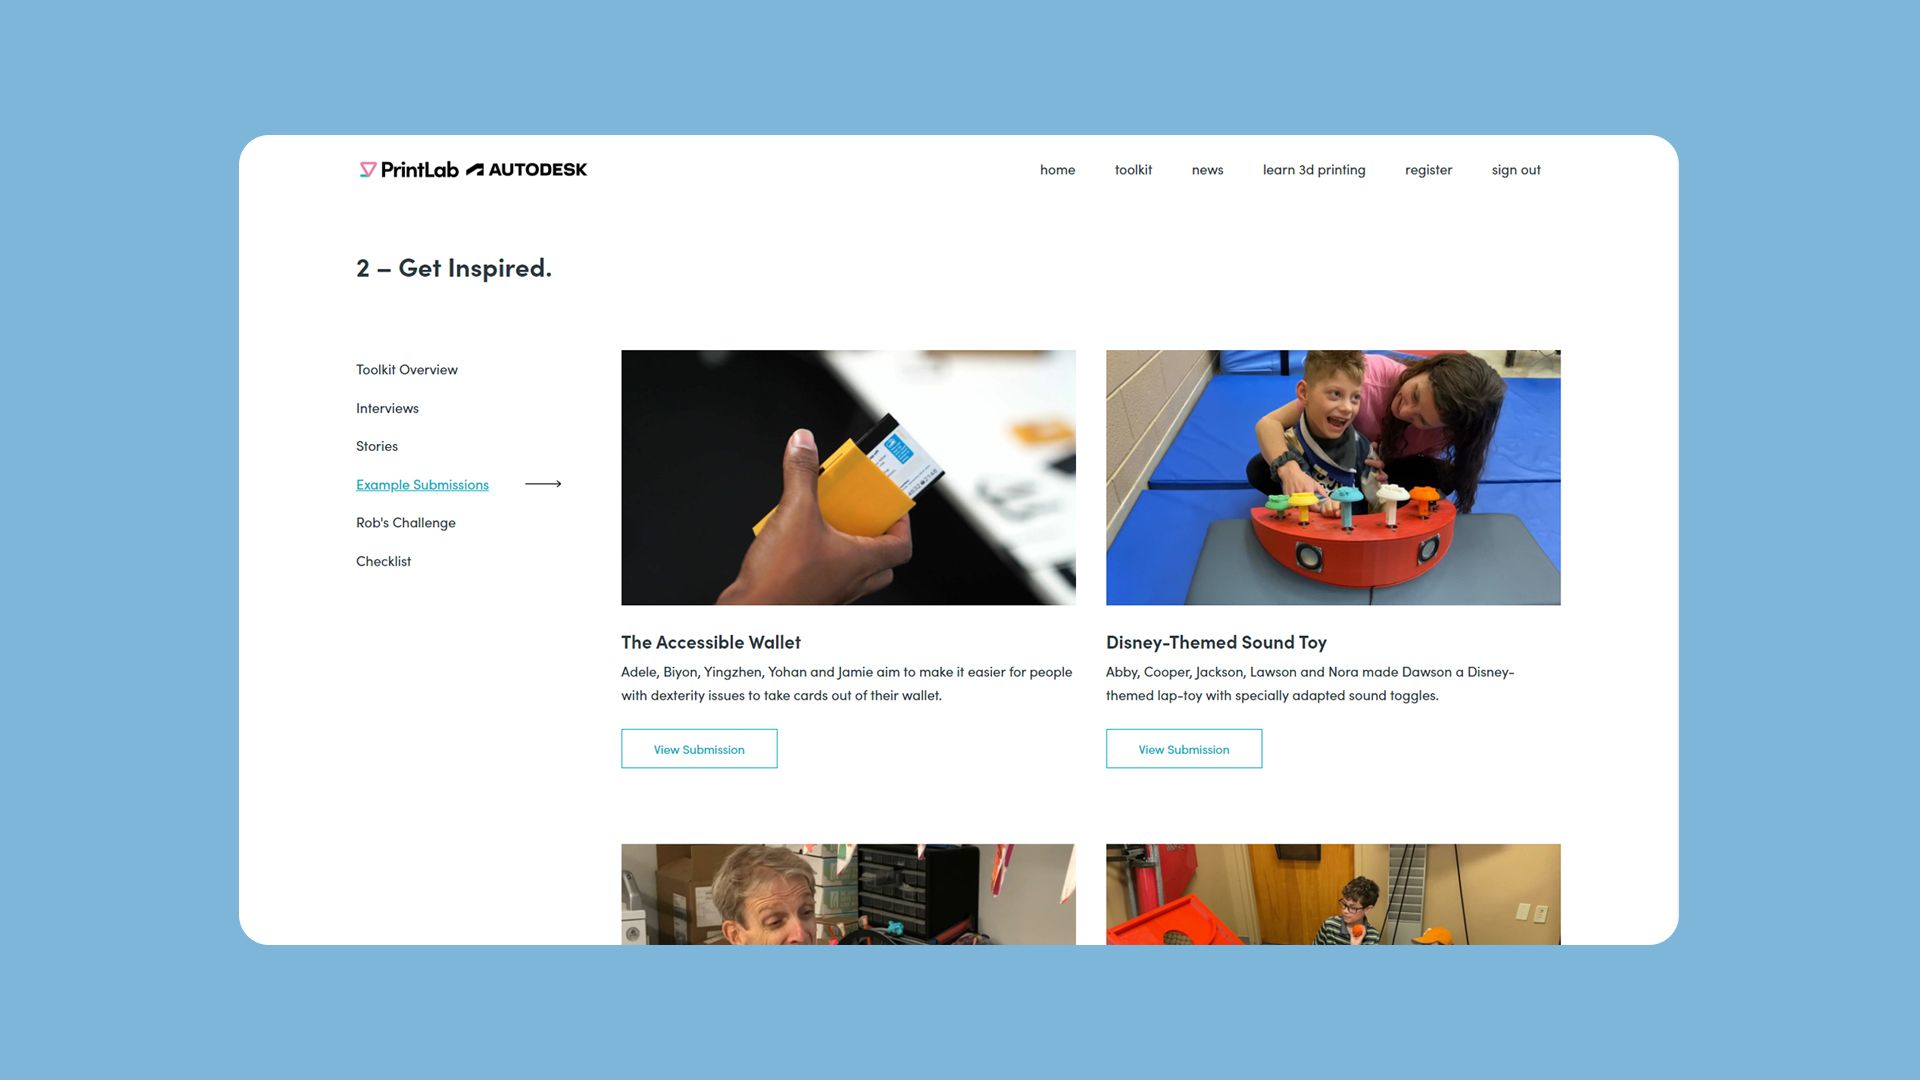 Website screen showing the get inspired toolkit from the Make:able Challenge.